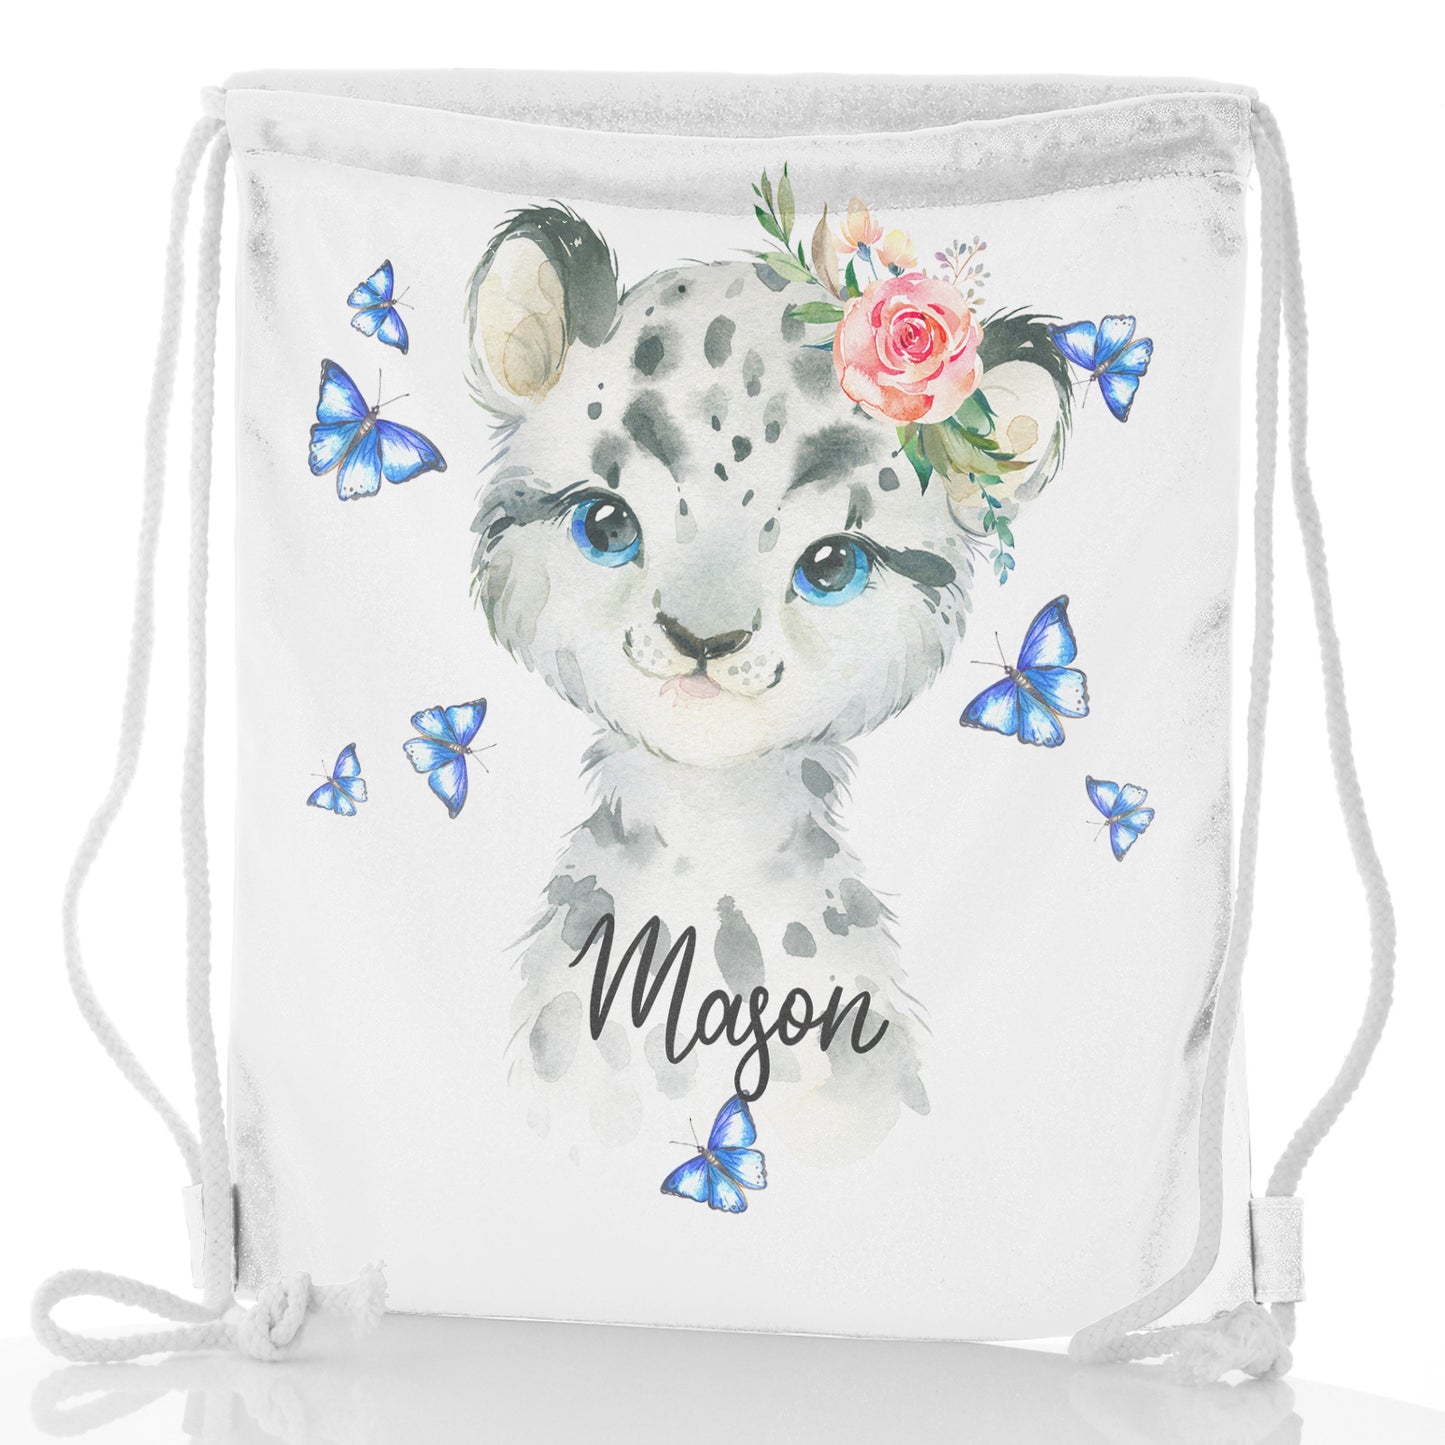 Personalised Glitter Drawstring Backpack with Snow Leopard Blue Butterflies and Cute Text